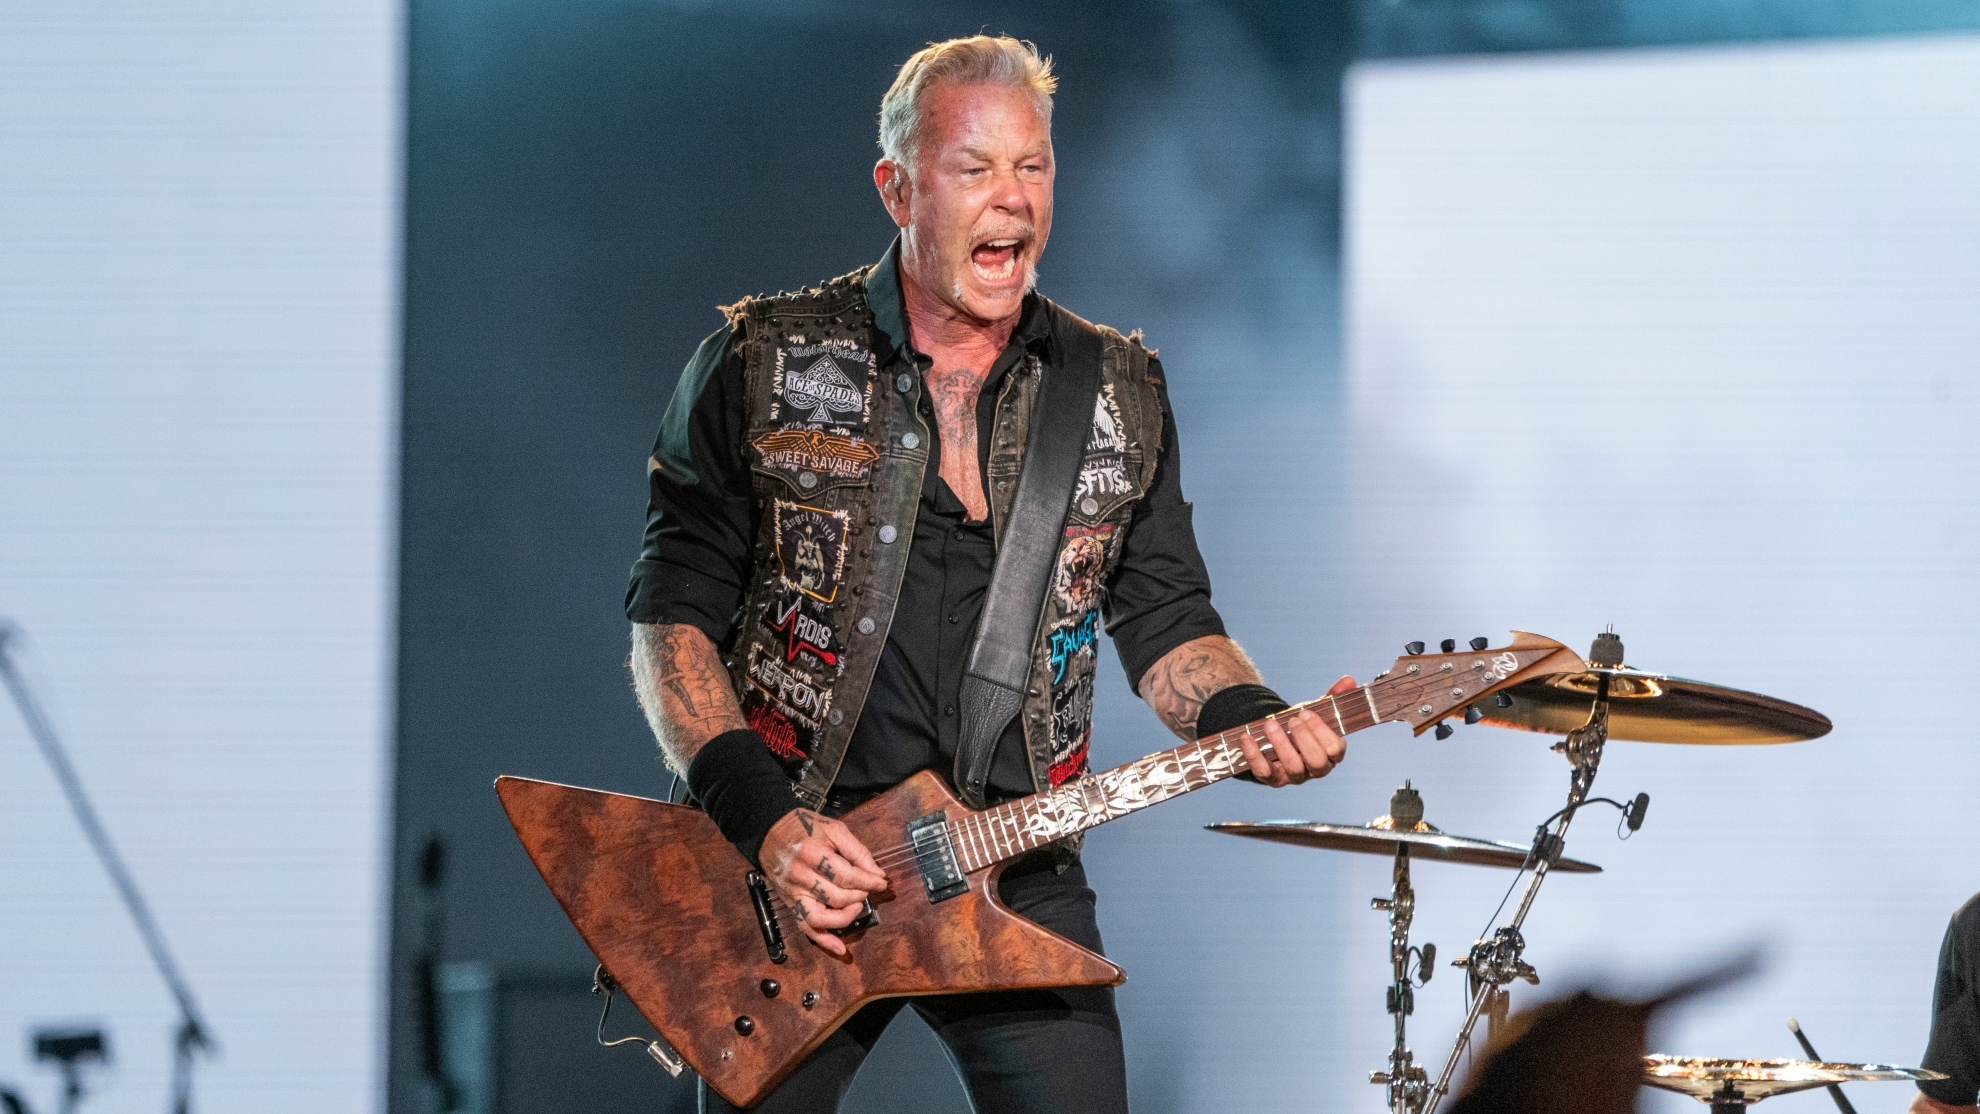 James Hetfield of Metallica performs at the Lollapalooza Music Festival in Chicago on July 28, 2022. Metallica, Mariah Carey and The Jonas Brothers will headline a free concert in New York's Central Park to mark the 10th anniversary of the Global Citizen Festival on Sept. 24.